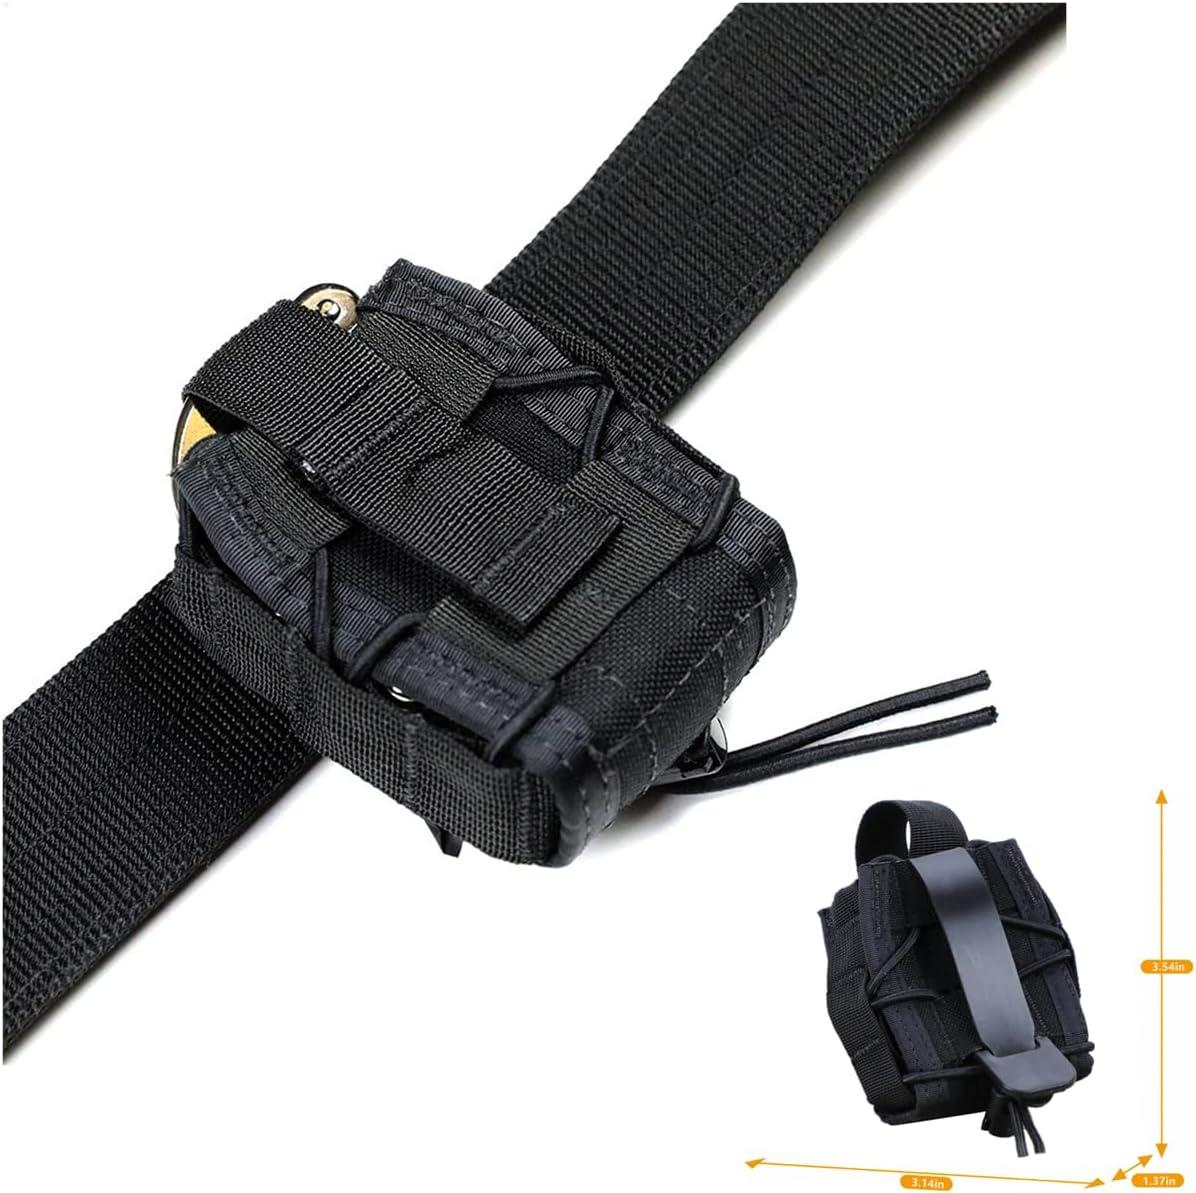 Handcuff Holster ,Open-Top Handcuff Pouch,Handcuff Case Fit Asp Handcuff /  Hinged Handcuff / Chain Handcuff / Folding Rigid Handcuff,Law Enforcement  Cuff Holder,Compatible MOLLE/Various Work Belts